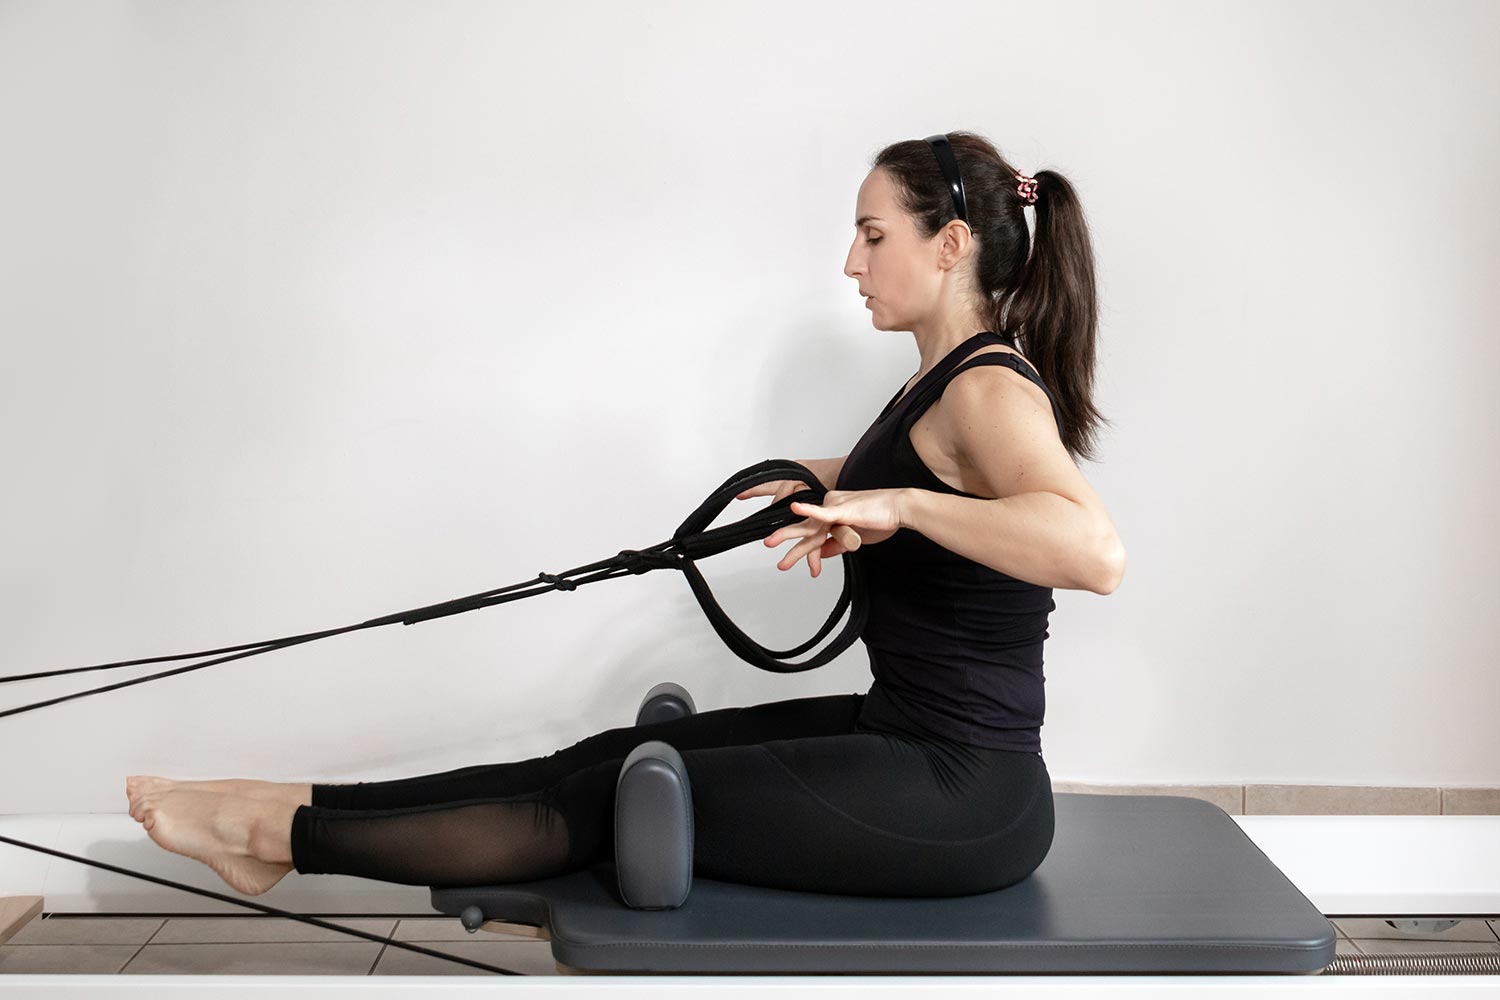 Importance of Alignment in Reformer Pilates